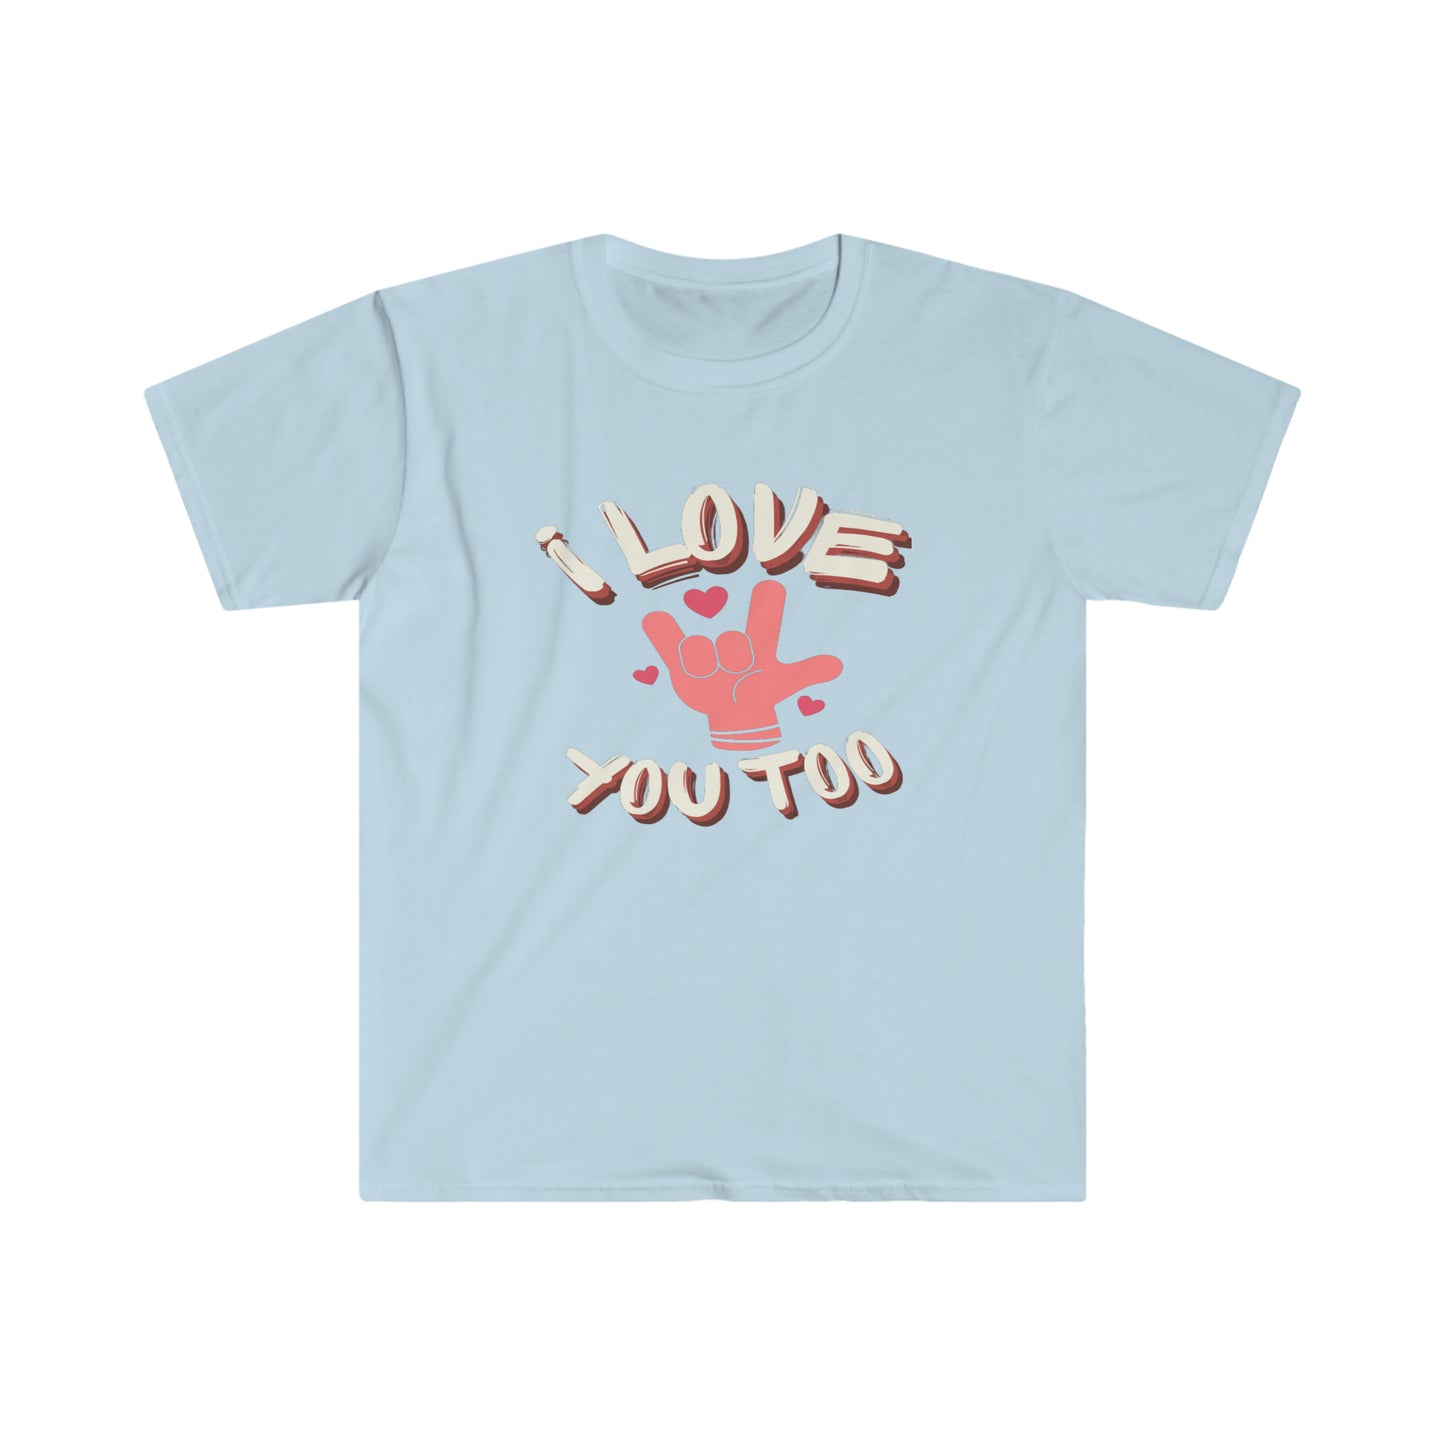 I Love You Too Unisex Softstyle T-Shirt